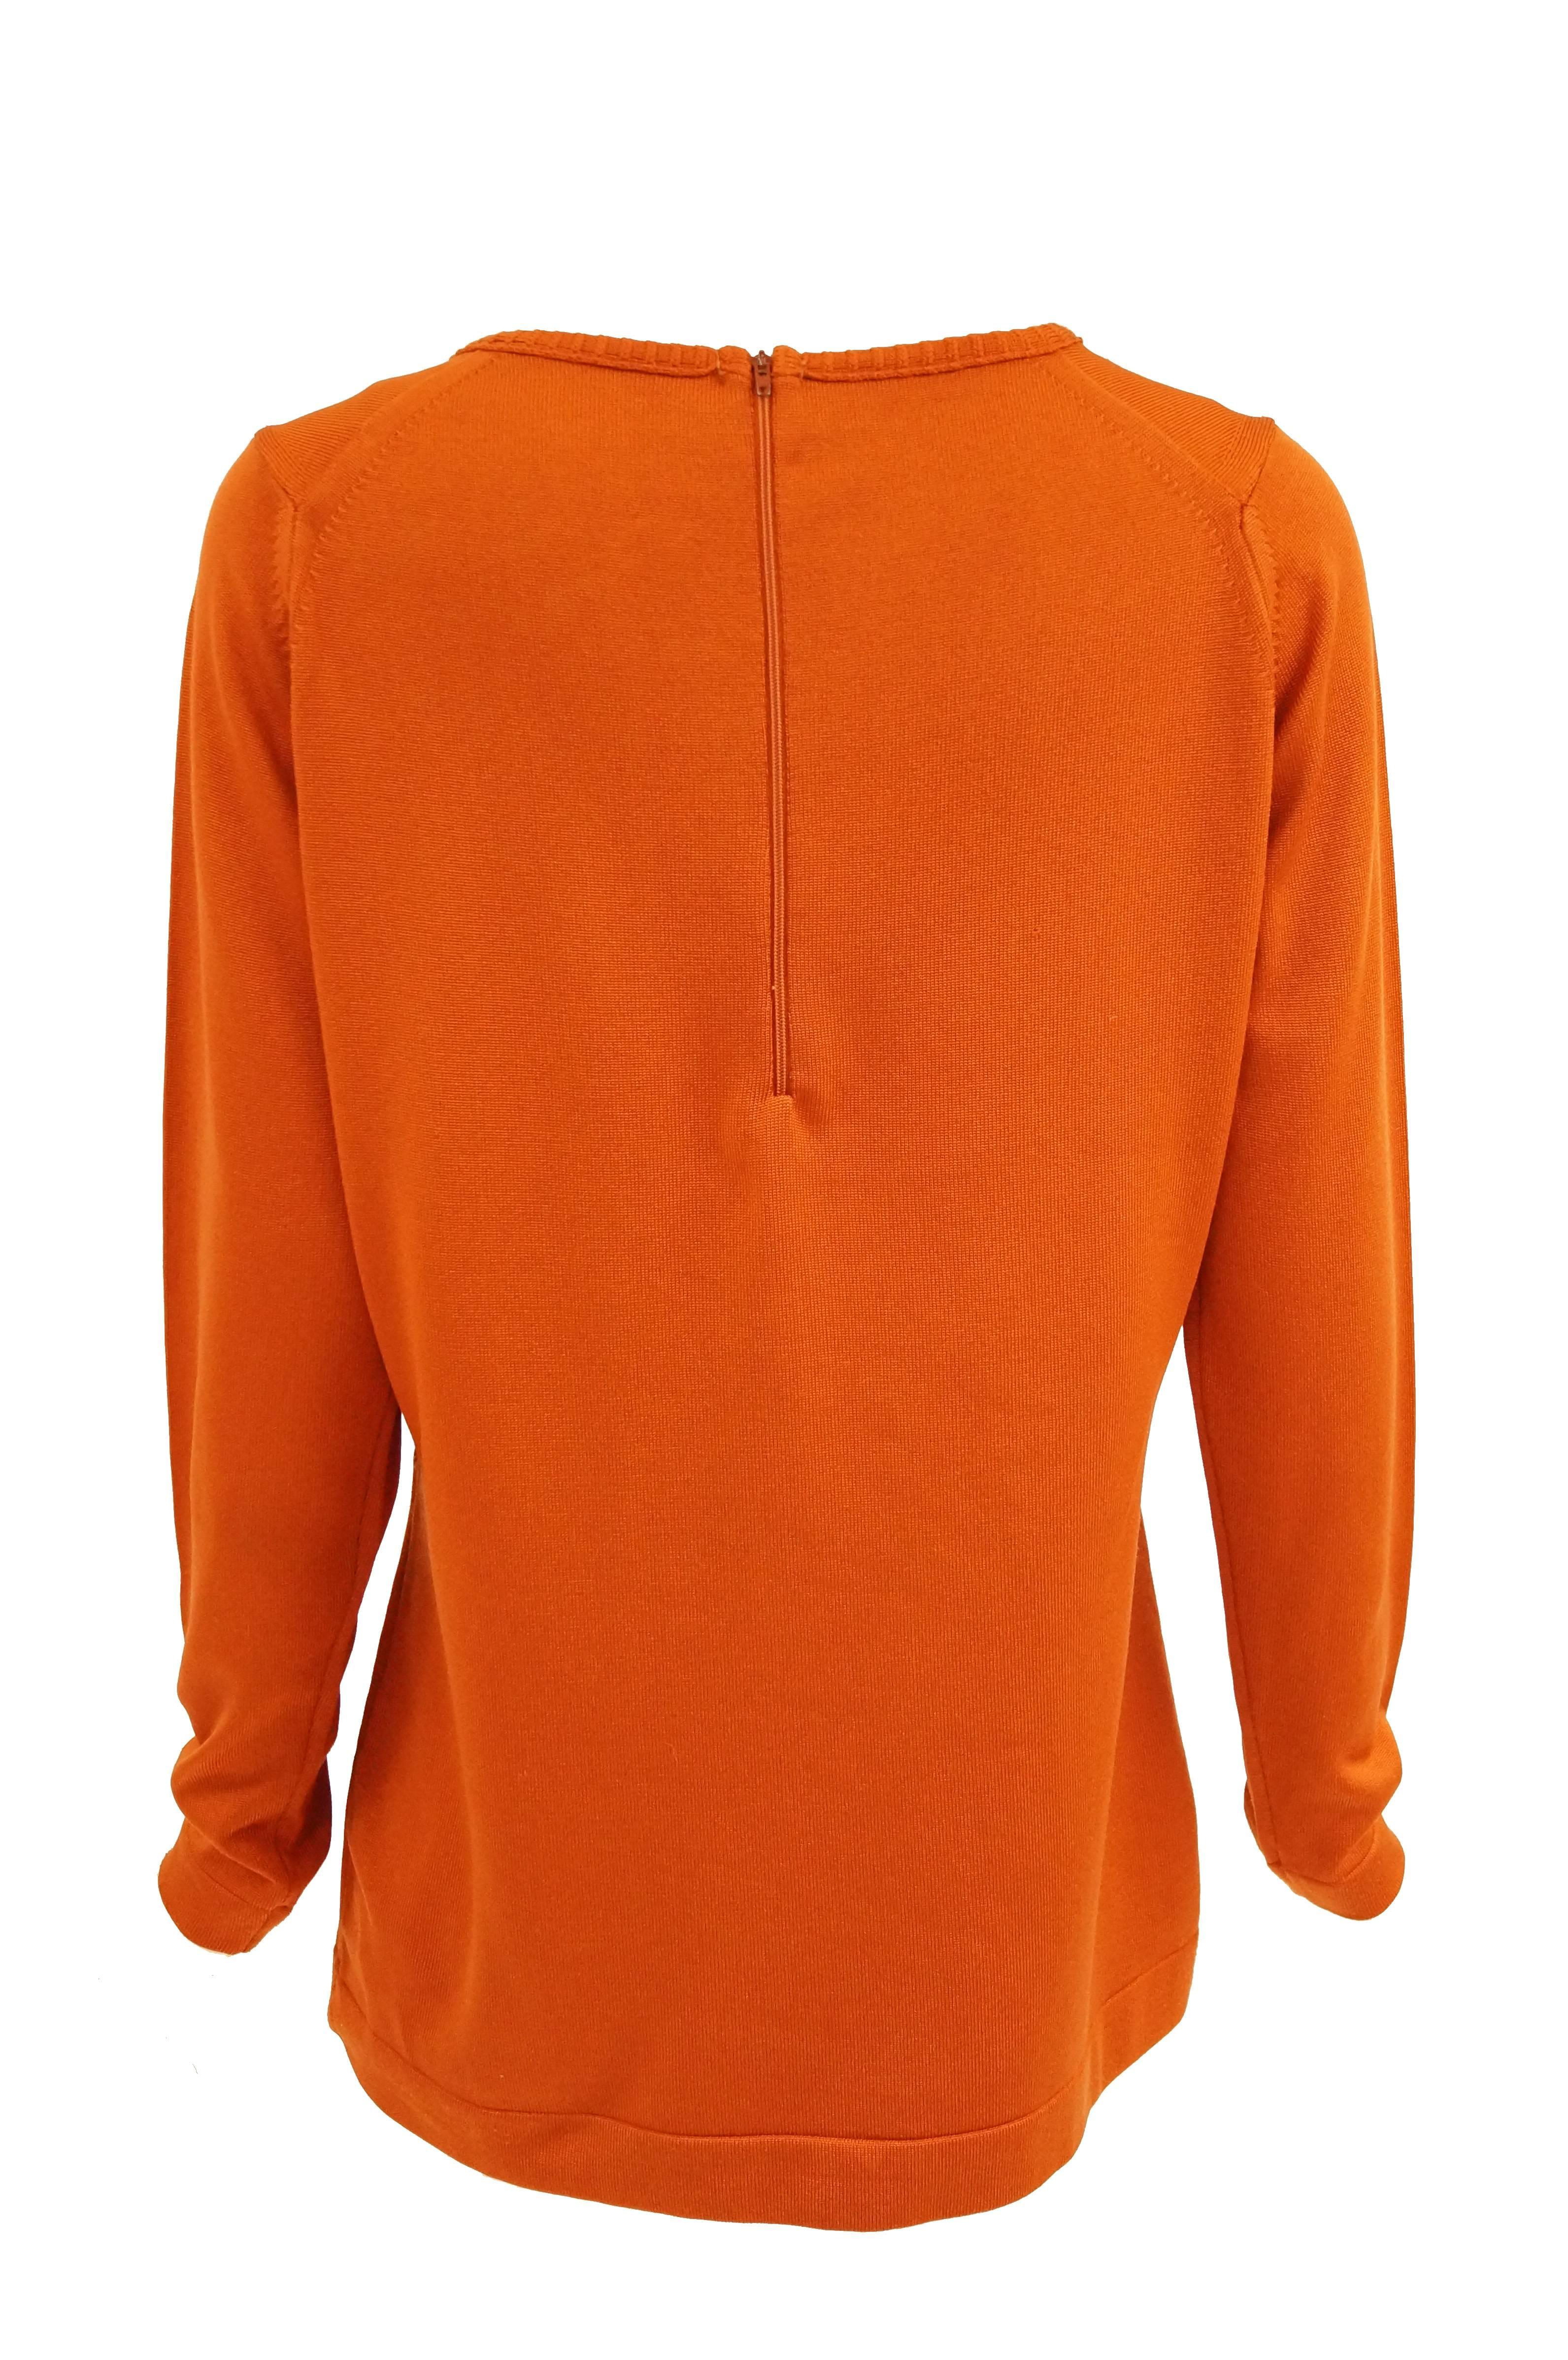 Givenchy Sport Tangerine Orange Pullover Sweater, 1970s  2